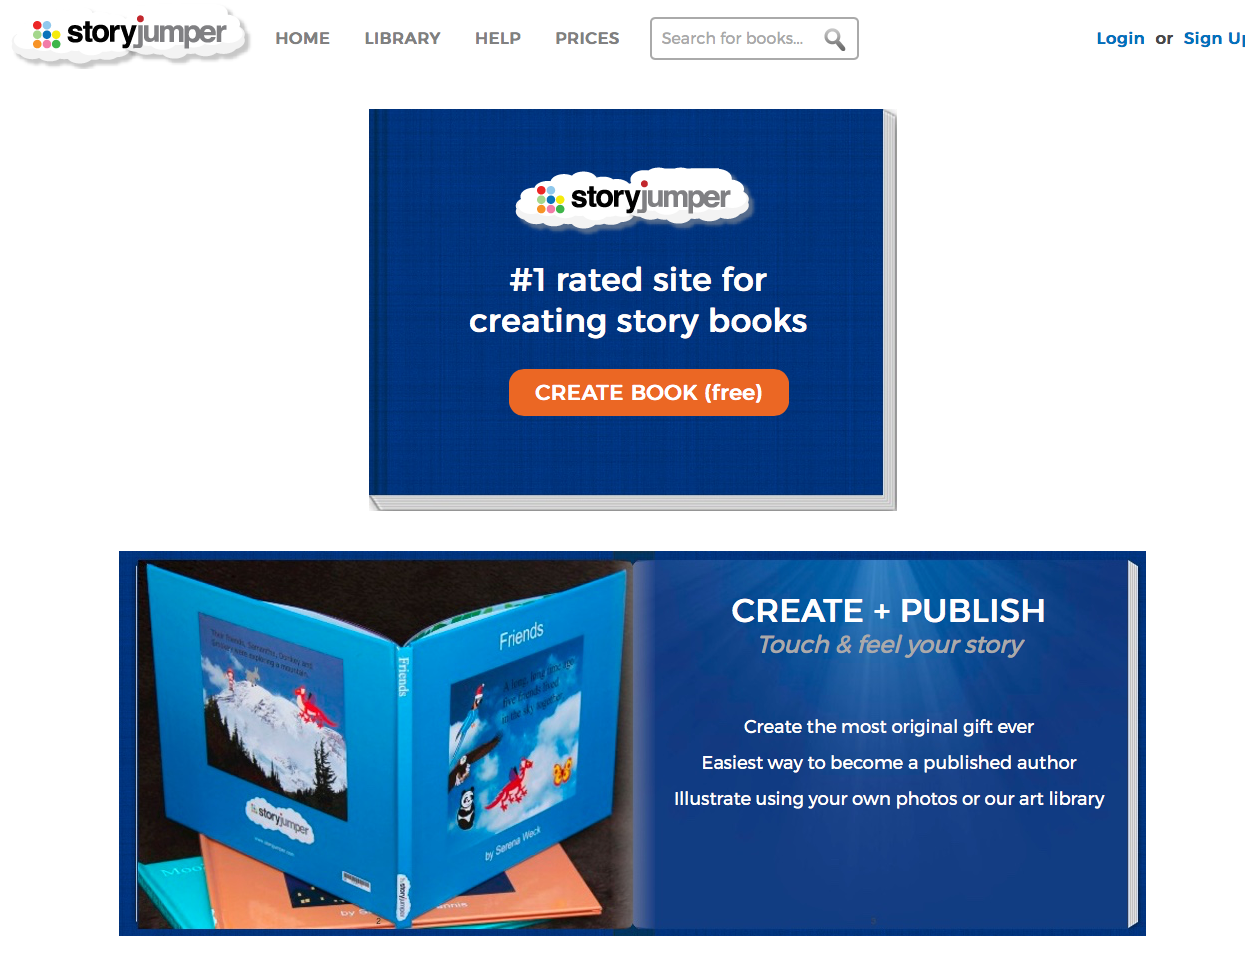 Create, share, and read books at StoryJumper